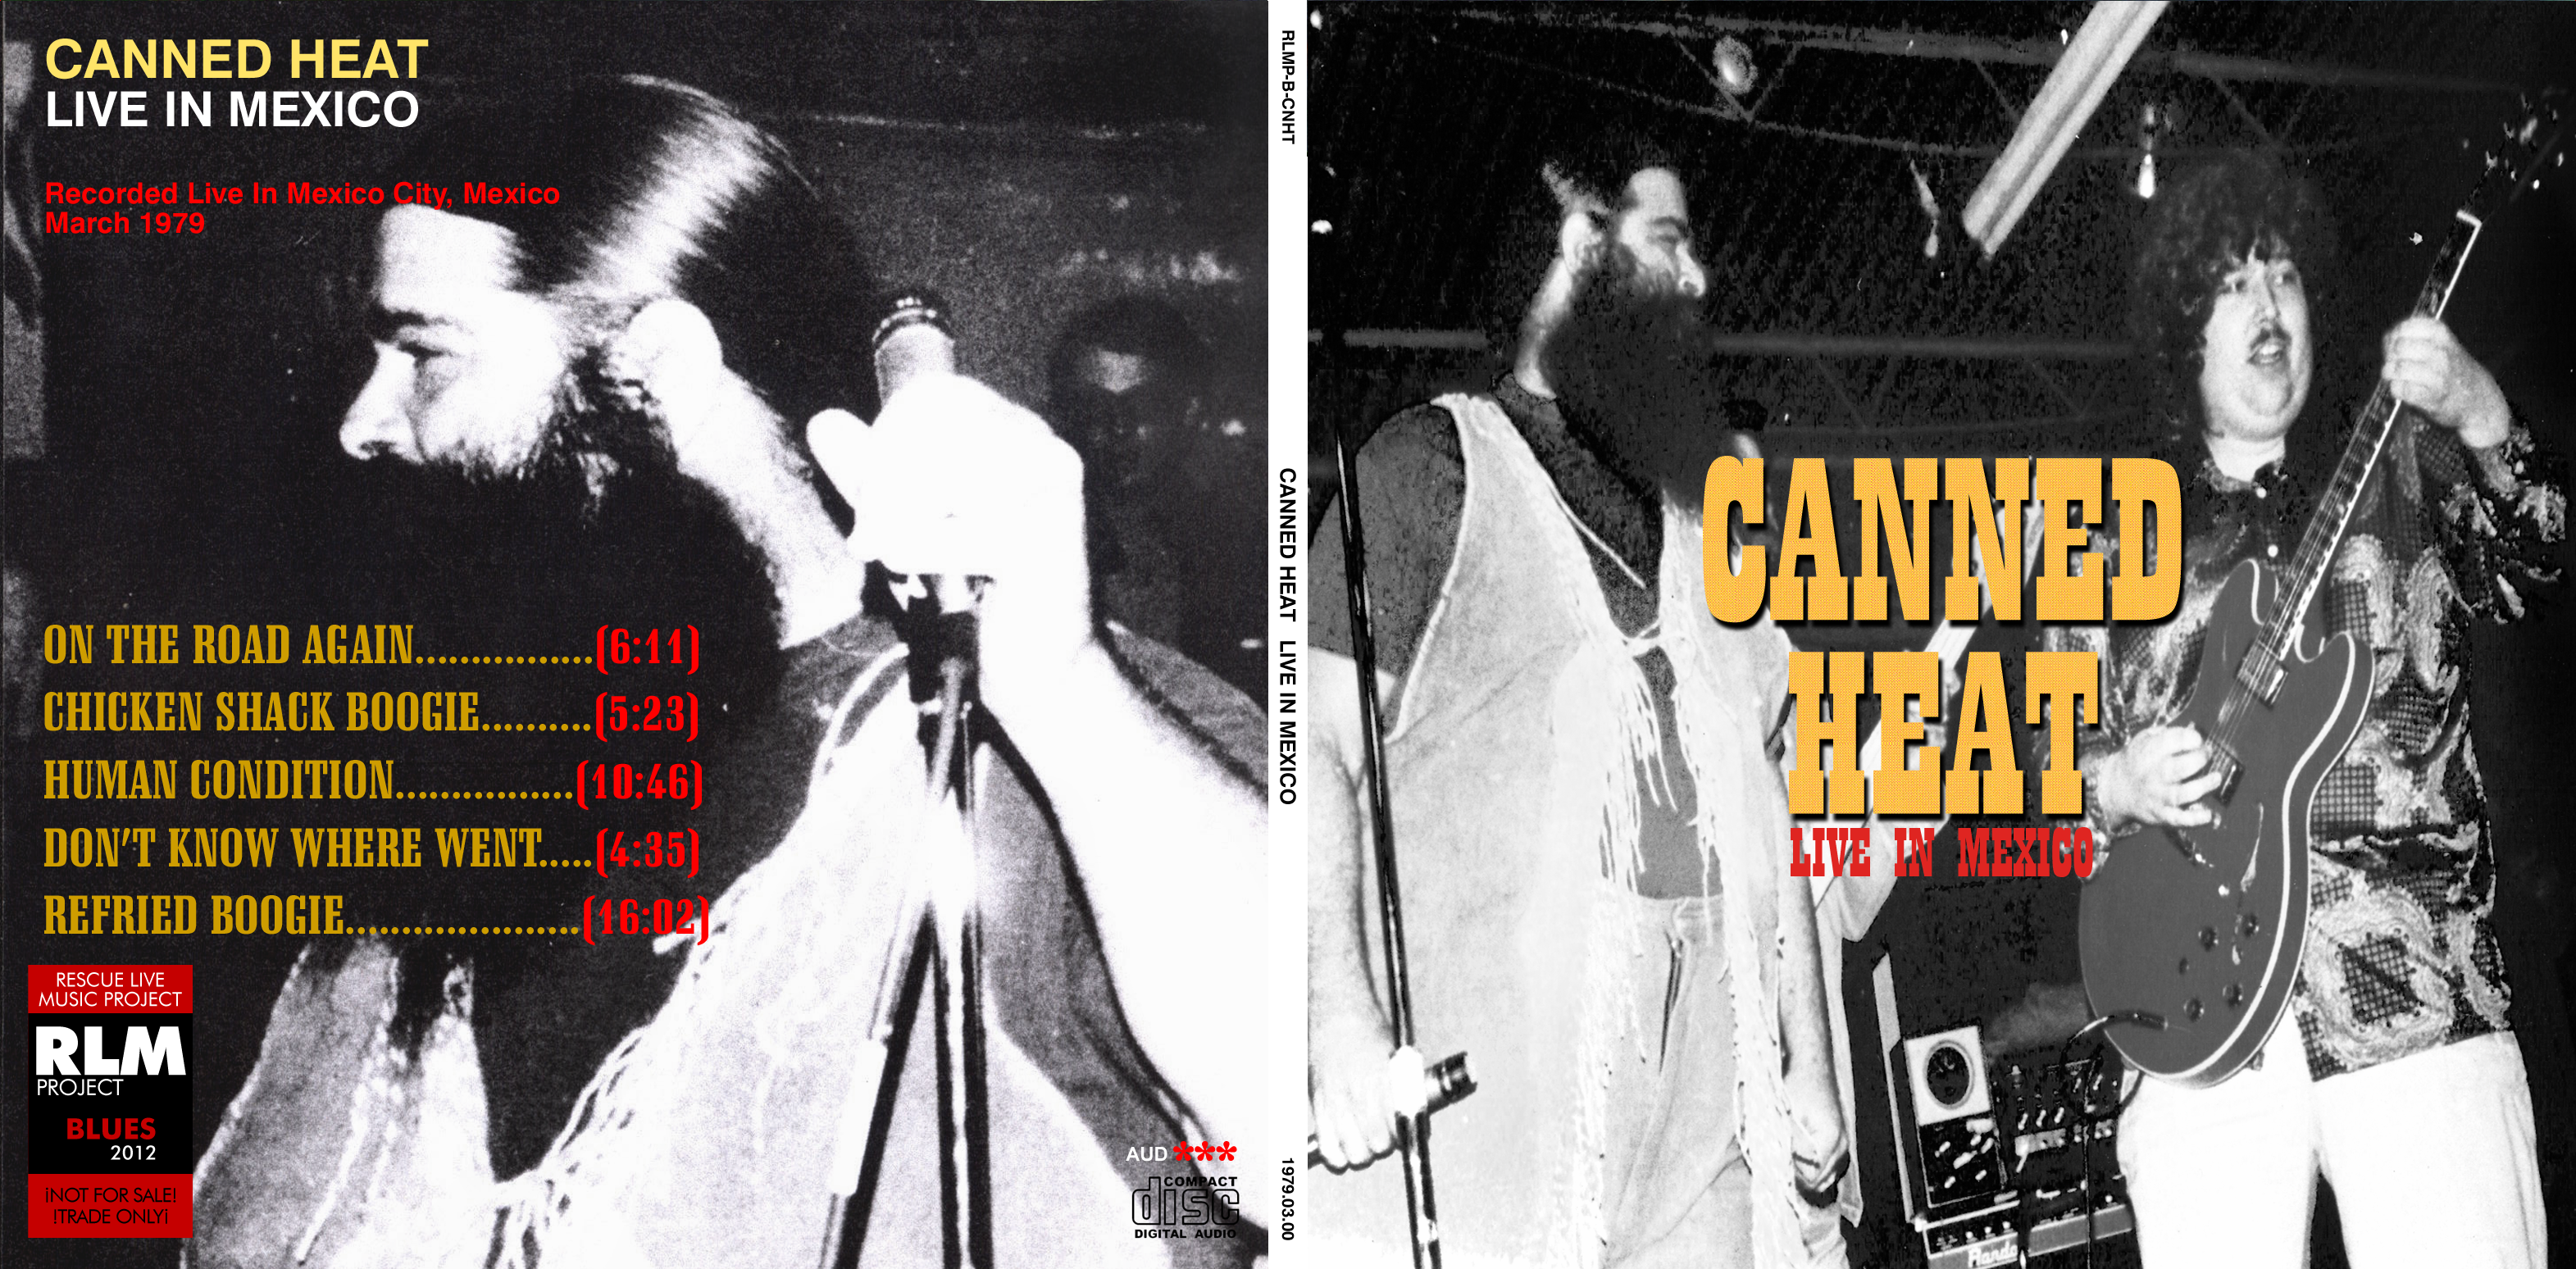 CannedHeat1979-03MexicoCityMexico (1).png